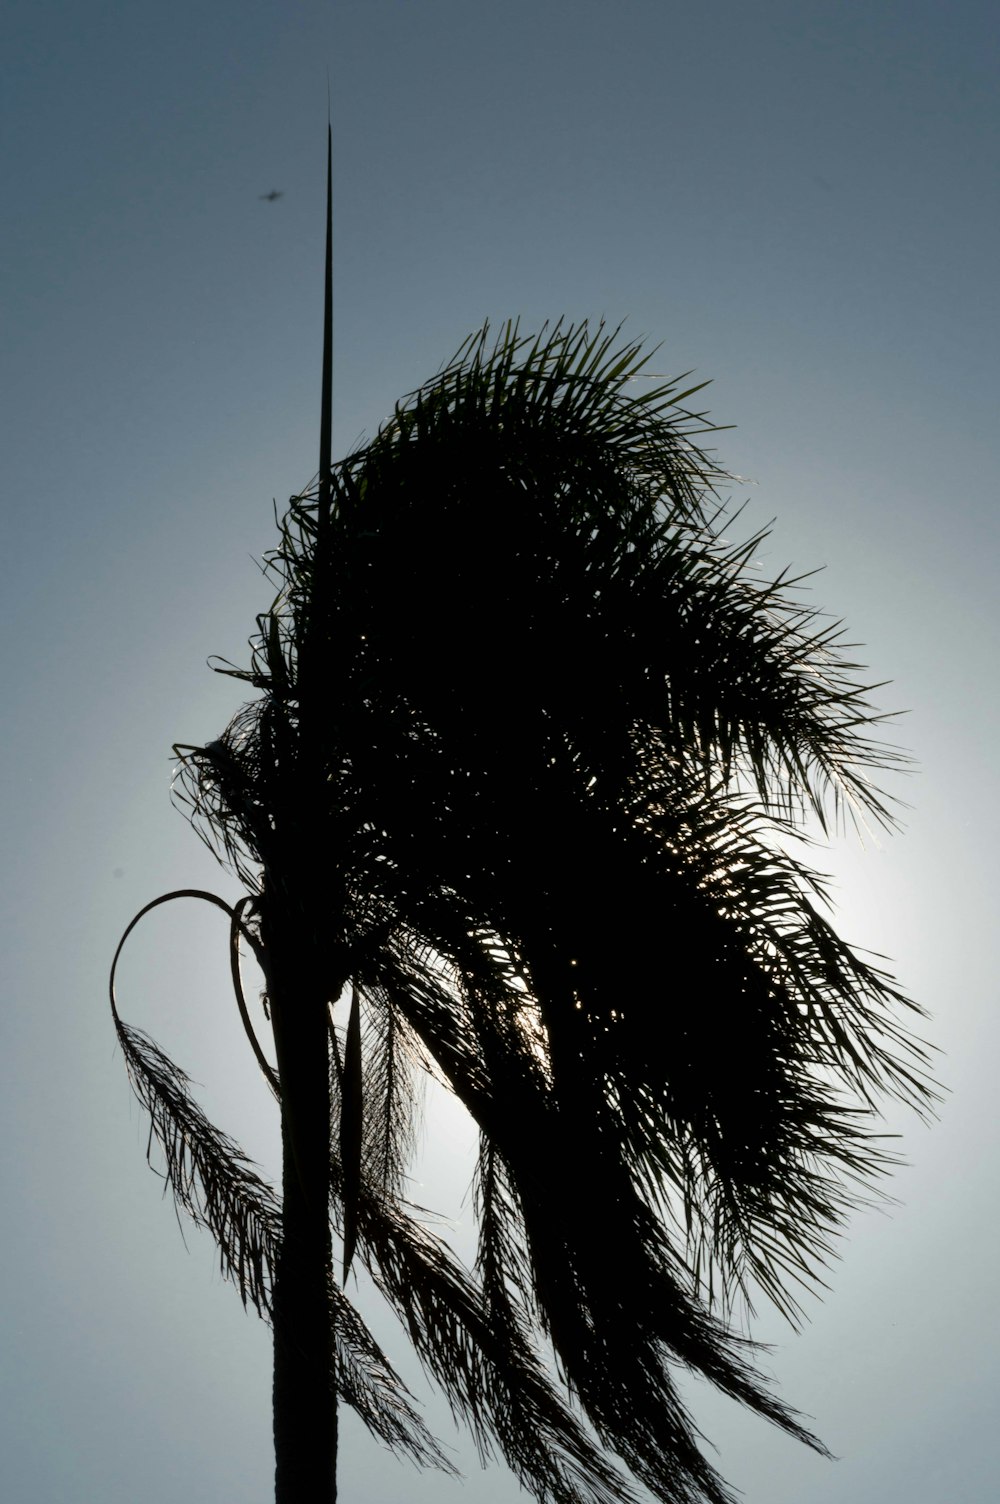 a palm tree blowing in the wind with the sun in the background